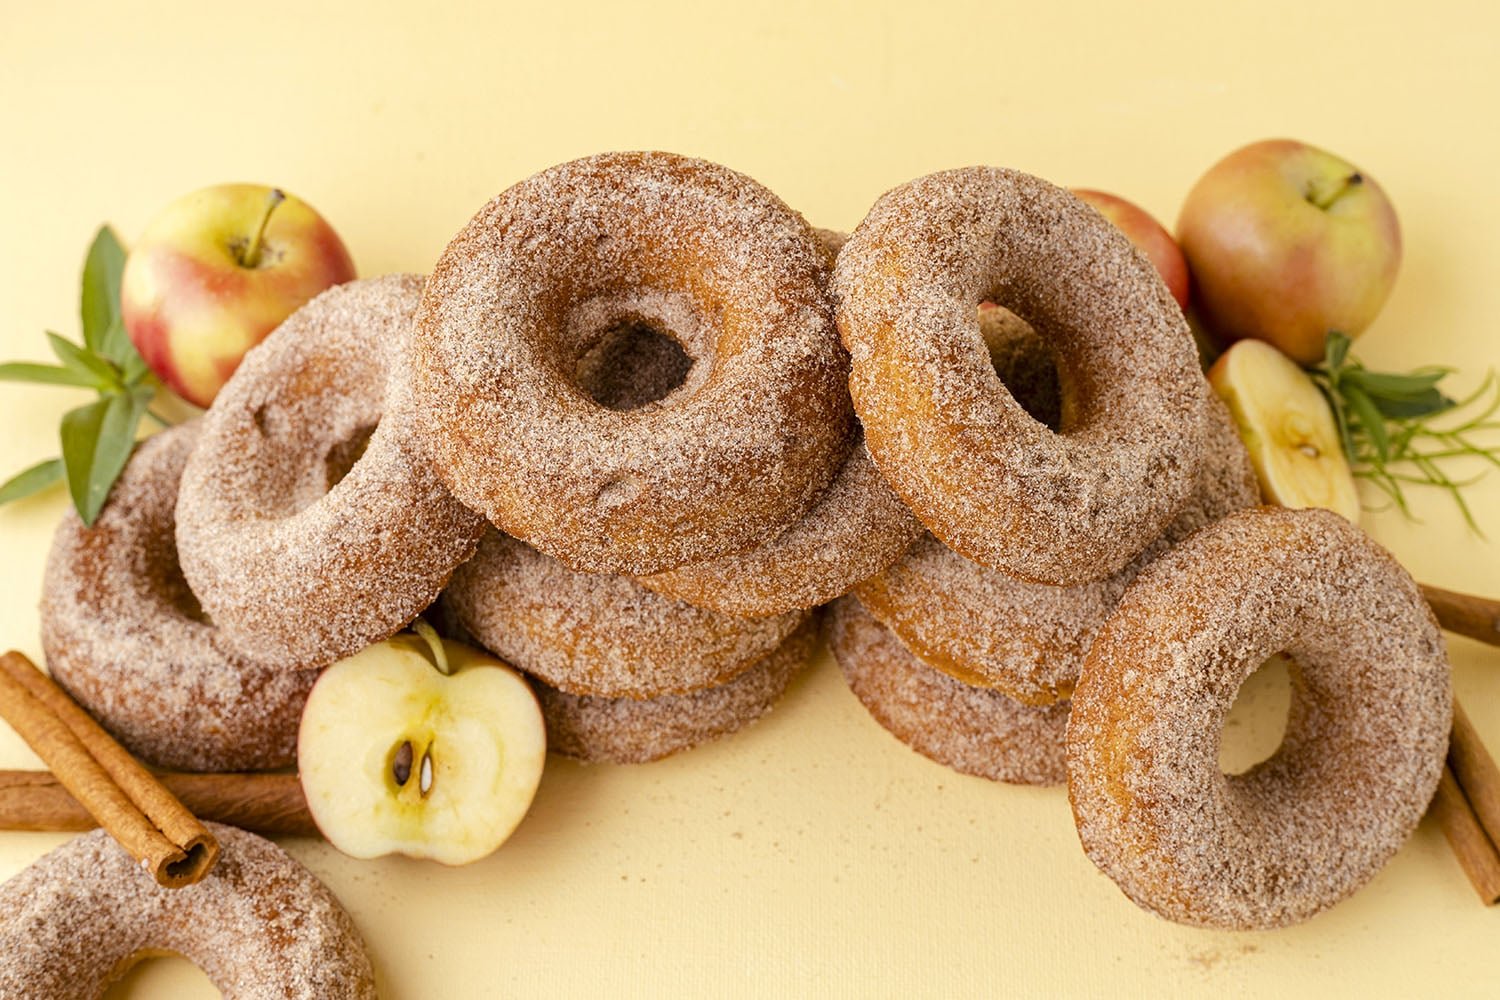 apple cider donuts in a stack with apples and cinnamon sticks on a yellow background